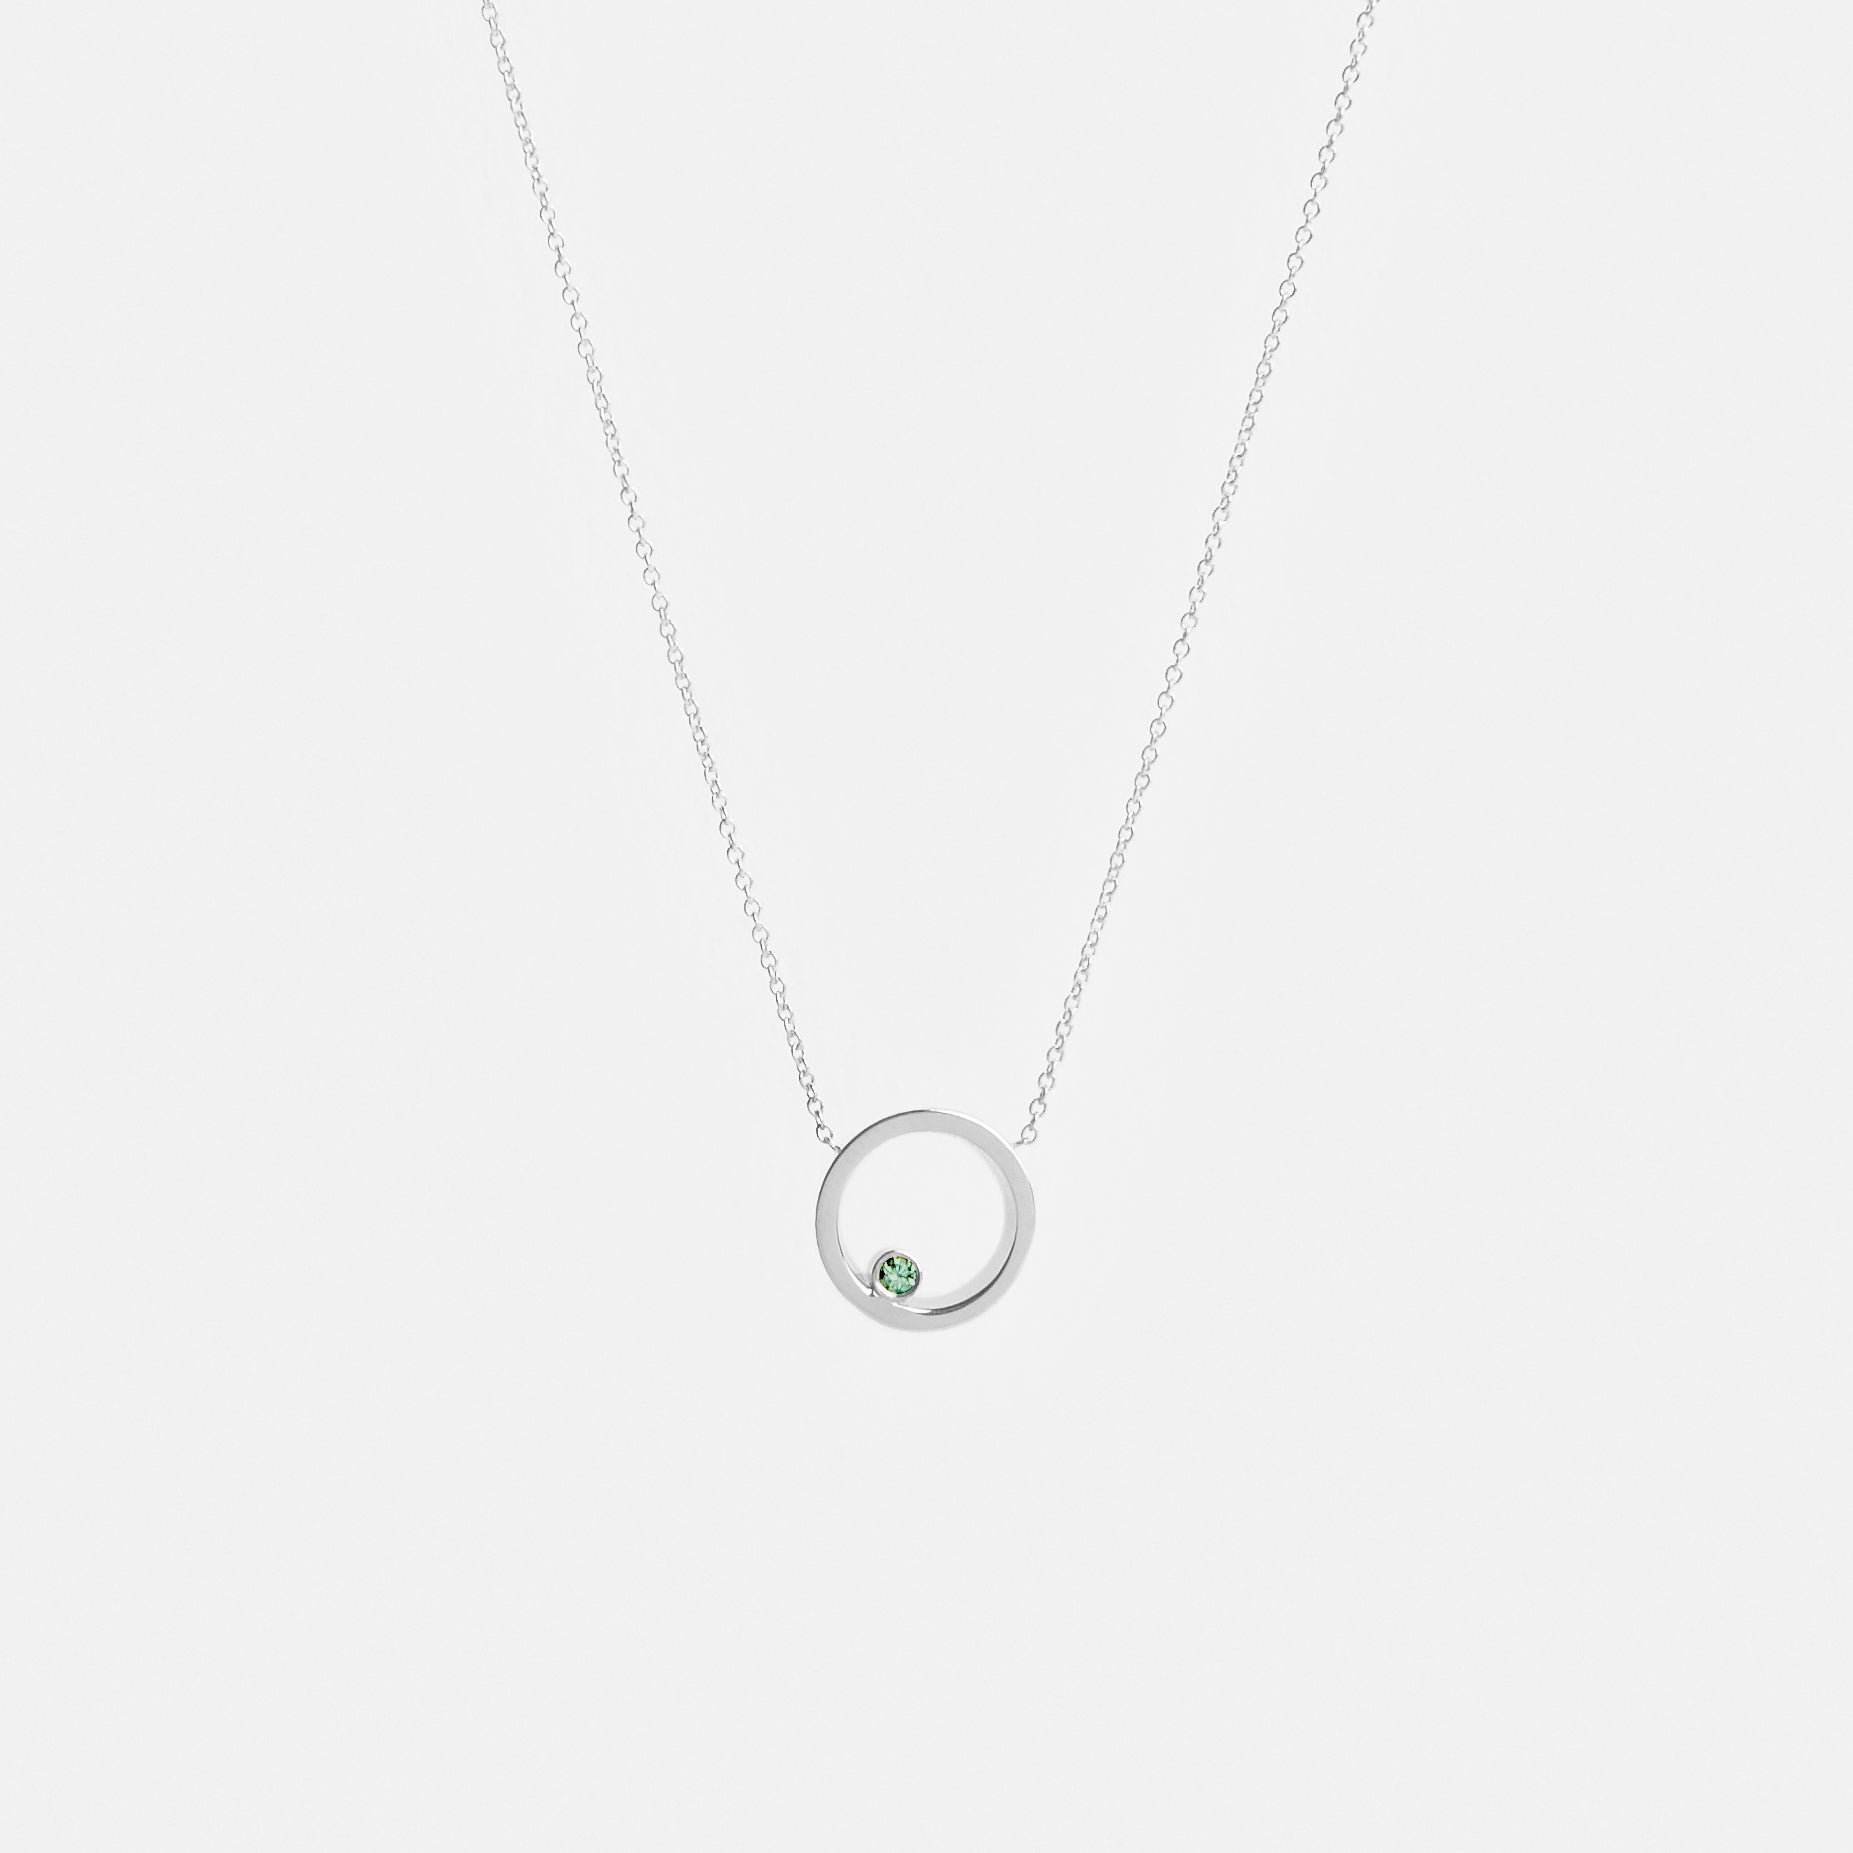 Ila Unconventional Necklace in Sterling Silver set with Green Diamond By SHW Fine Jewelry NYC